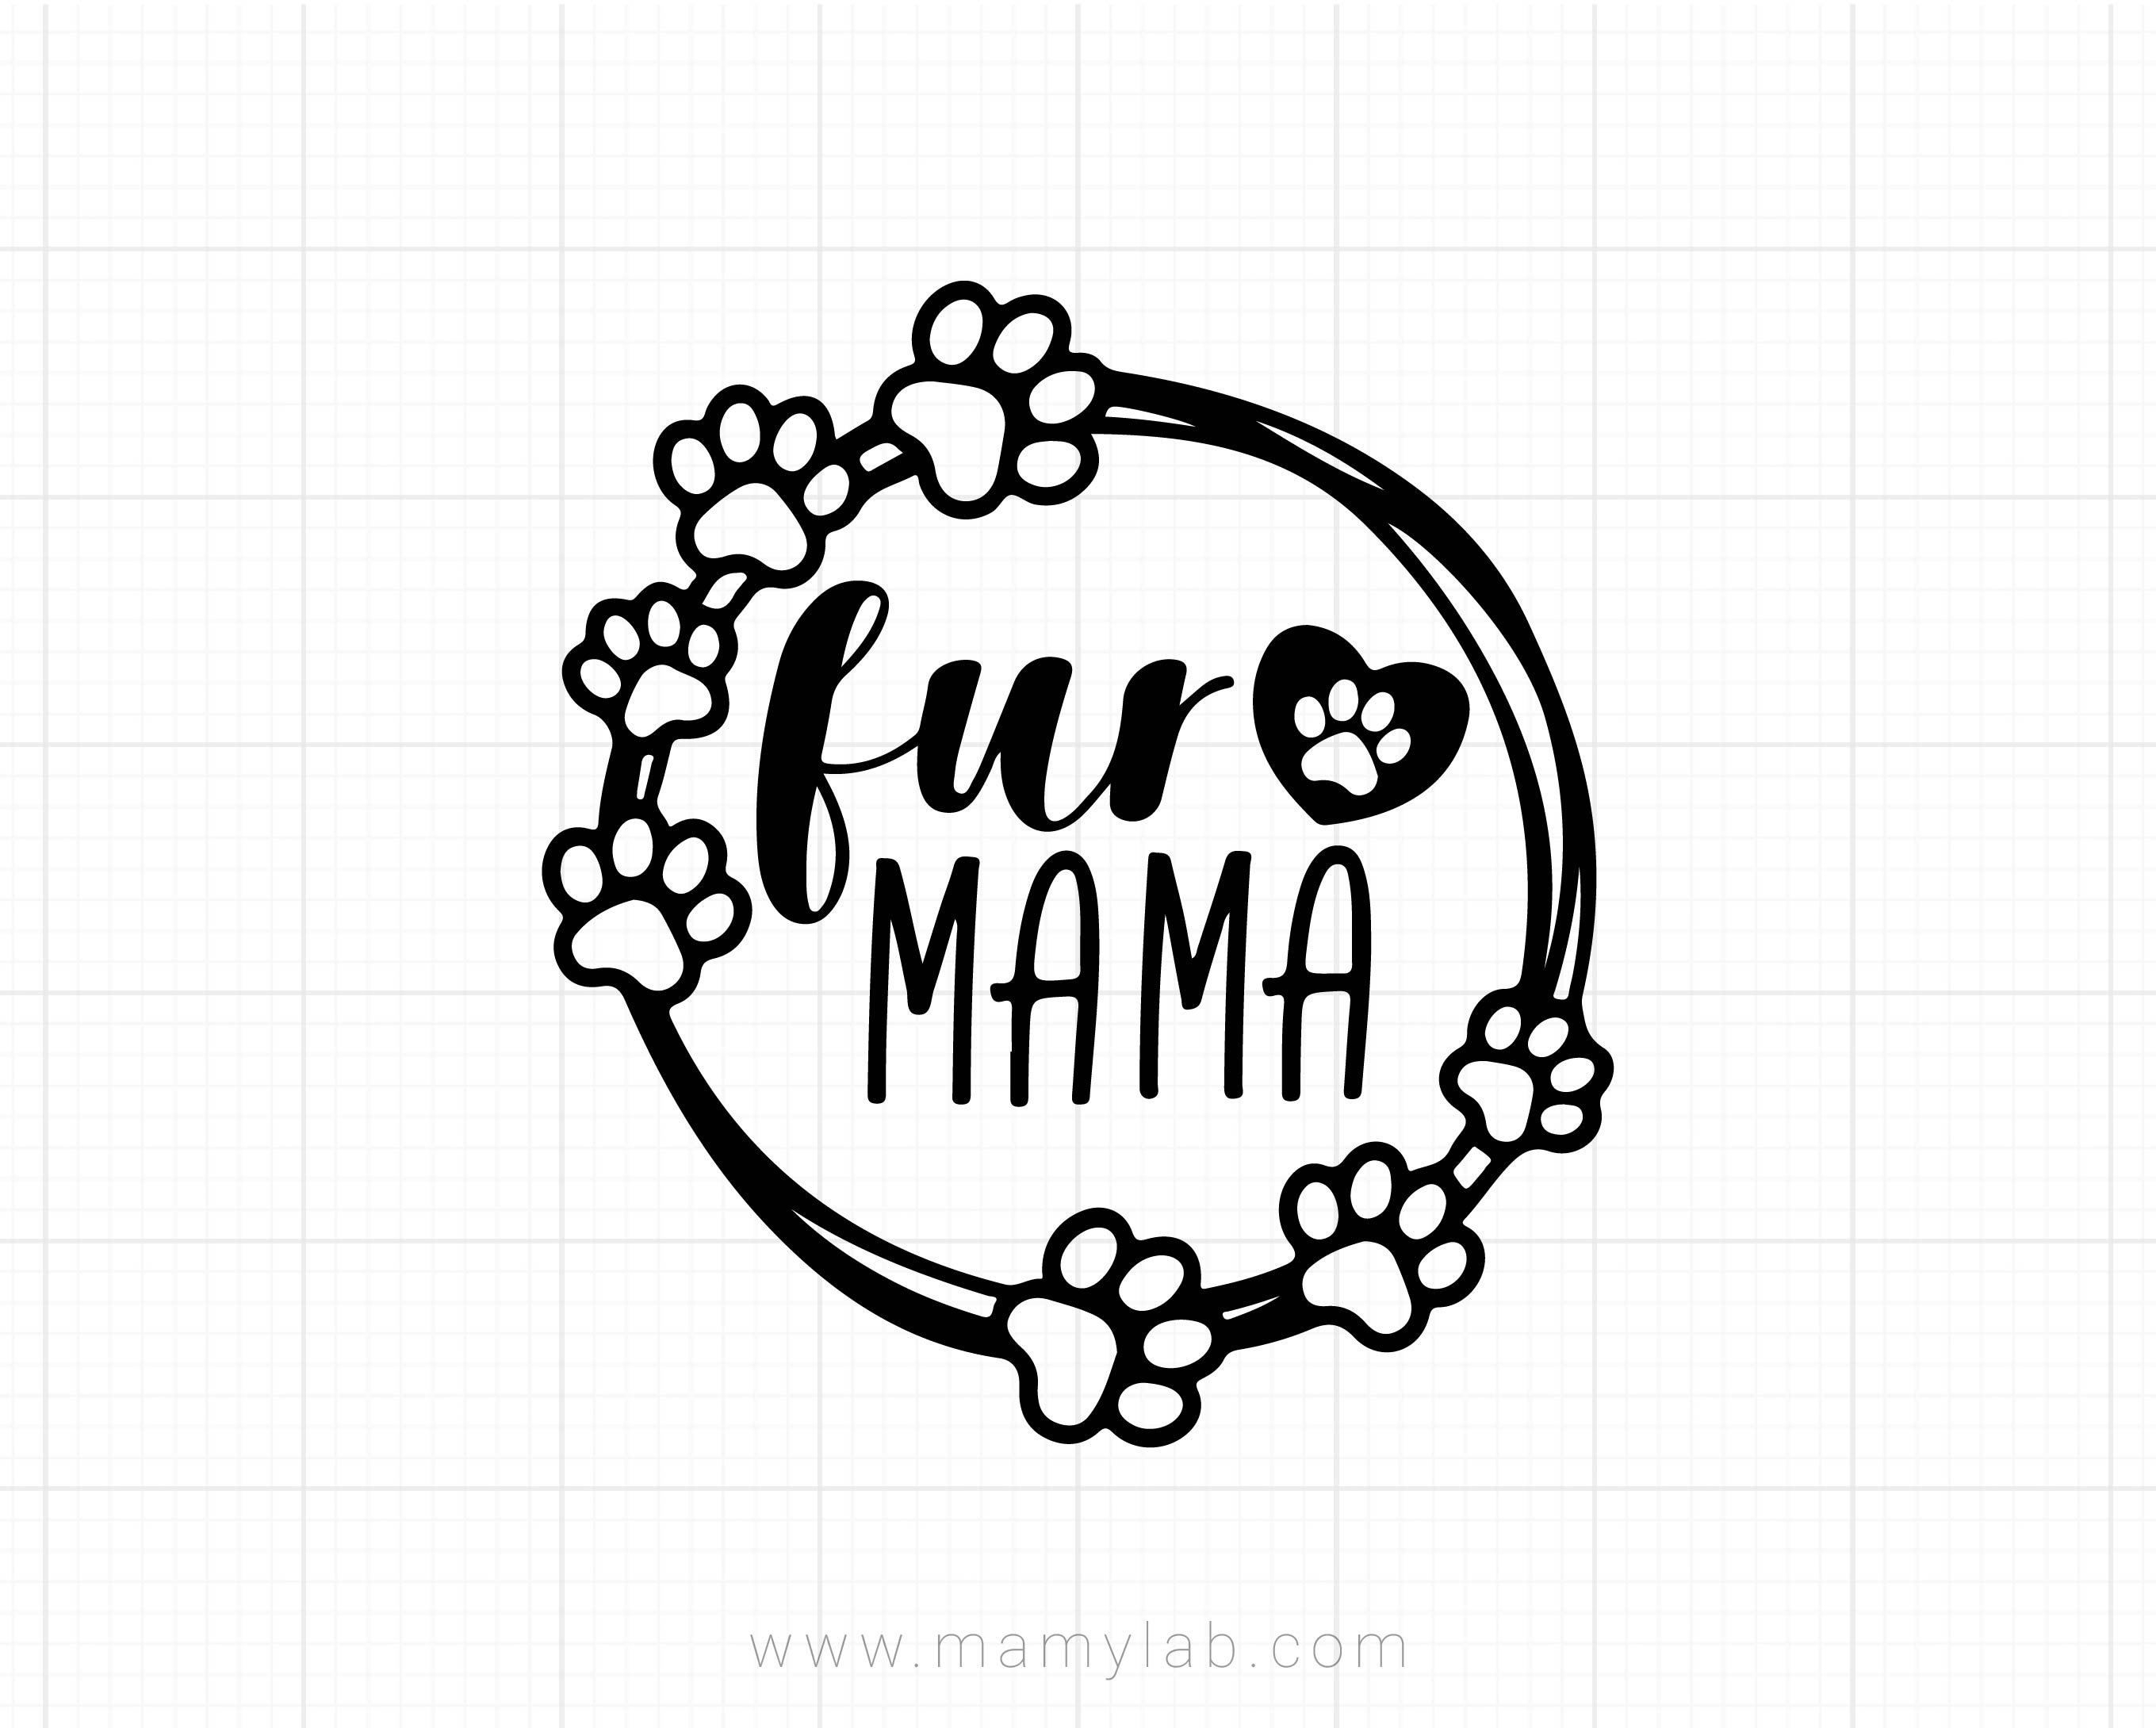 Dxf Best Dog Mom Ever Dog Lover Svg Png And Jpg Files For Cutting Machines Cricut Cameo Silhouette Cutting Files Vinyl Cutter Visual Arts Collage